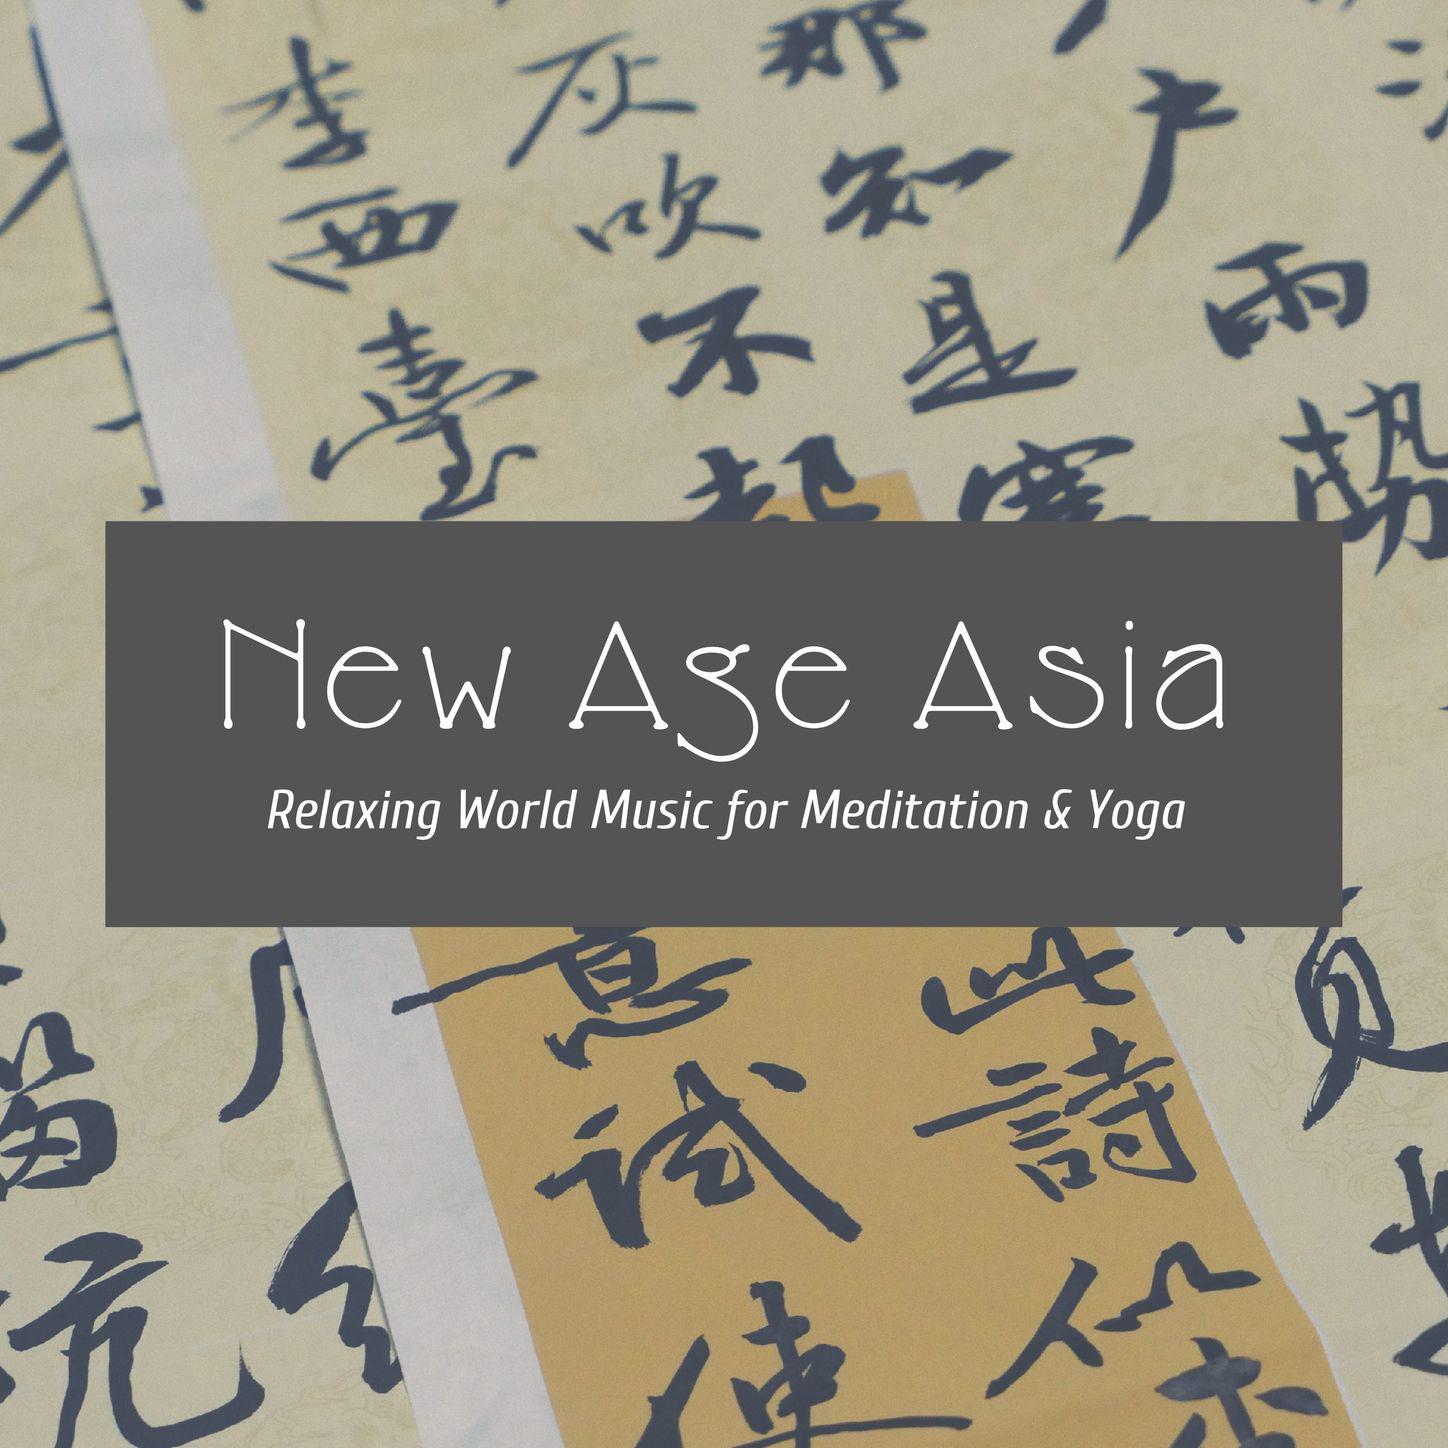 New Age Asia: Relaxing World Music for Meditation & Yoga